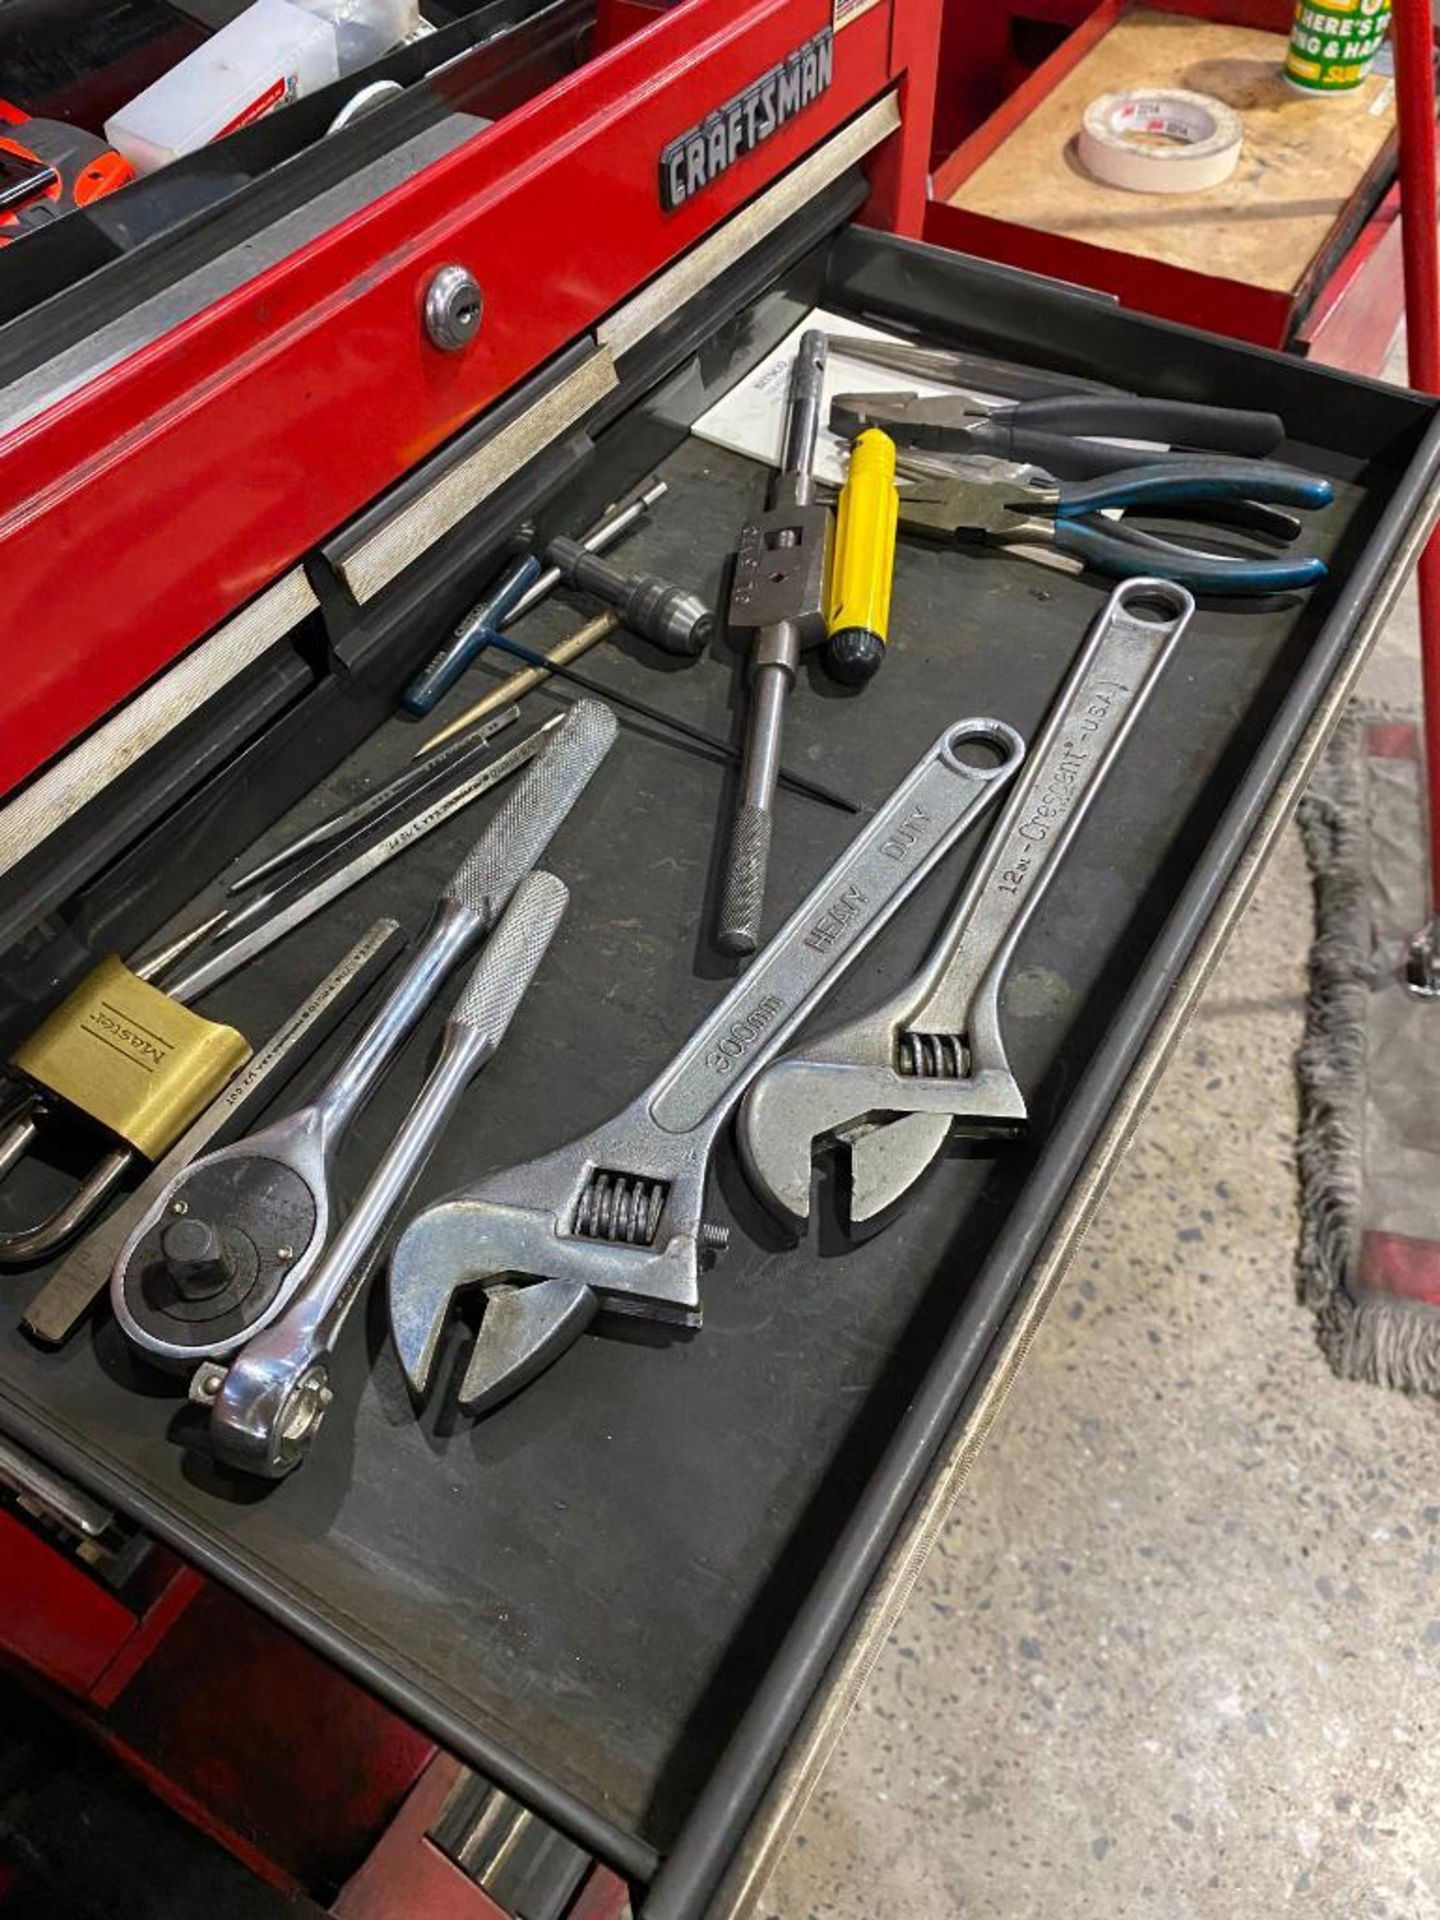 CRAFTSMAN ROLLING TOOLBOX AND CONTENTS - Image 2 of 7